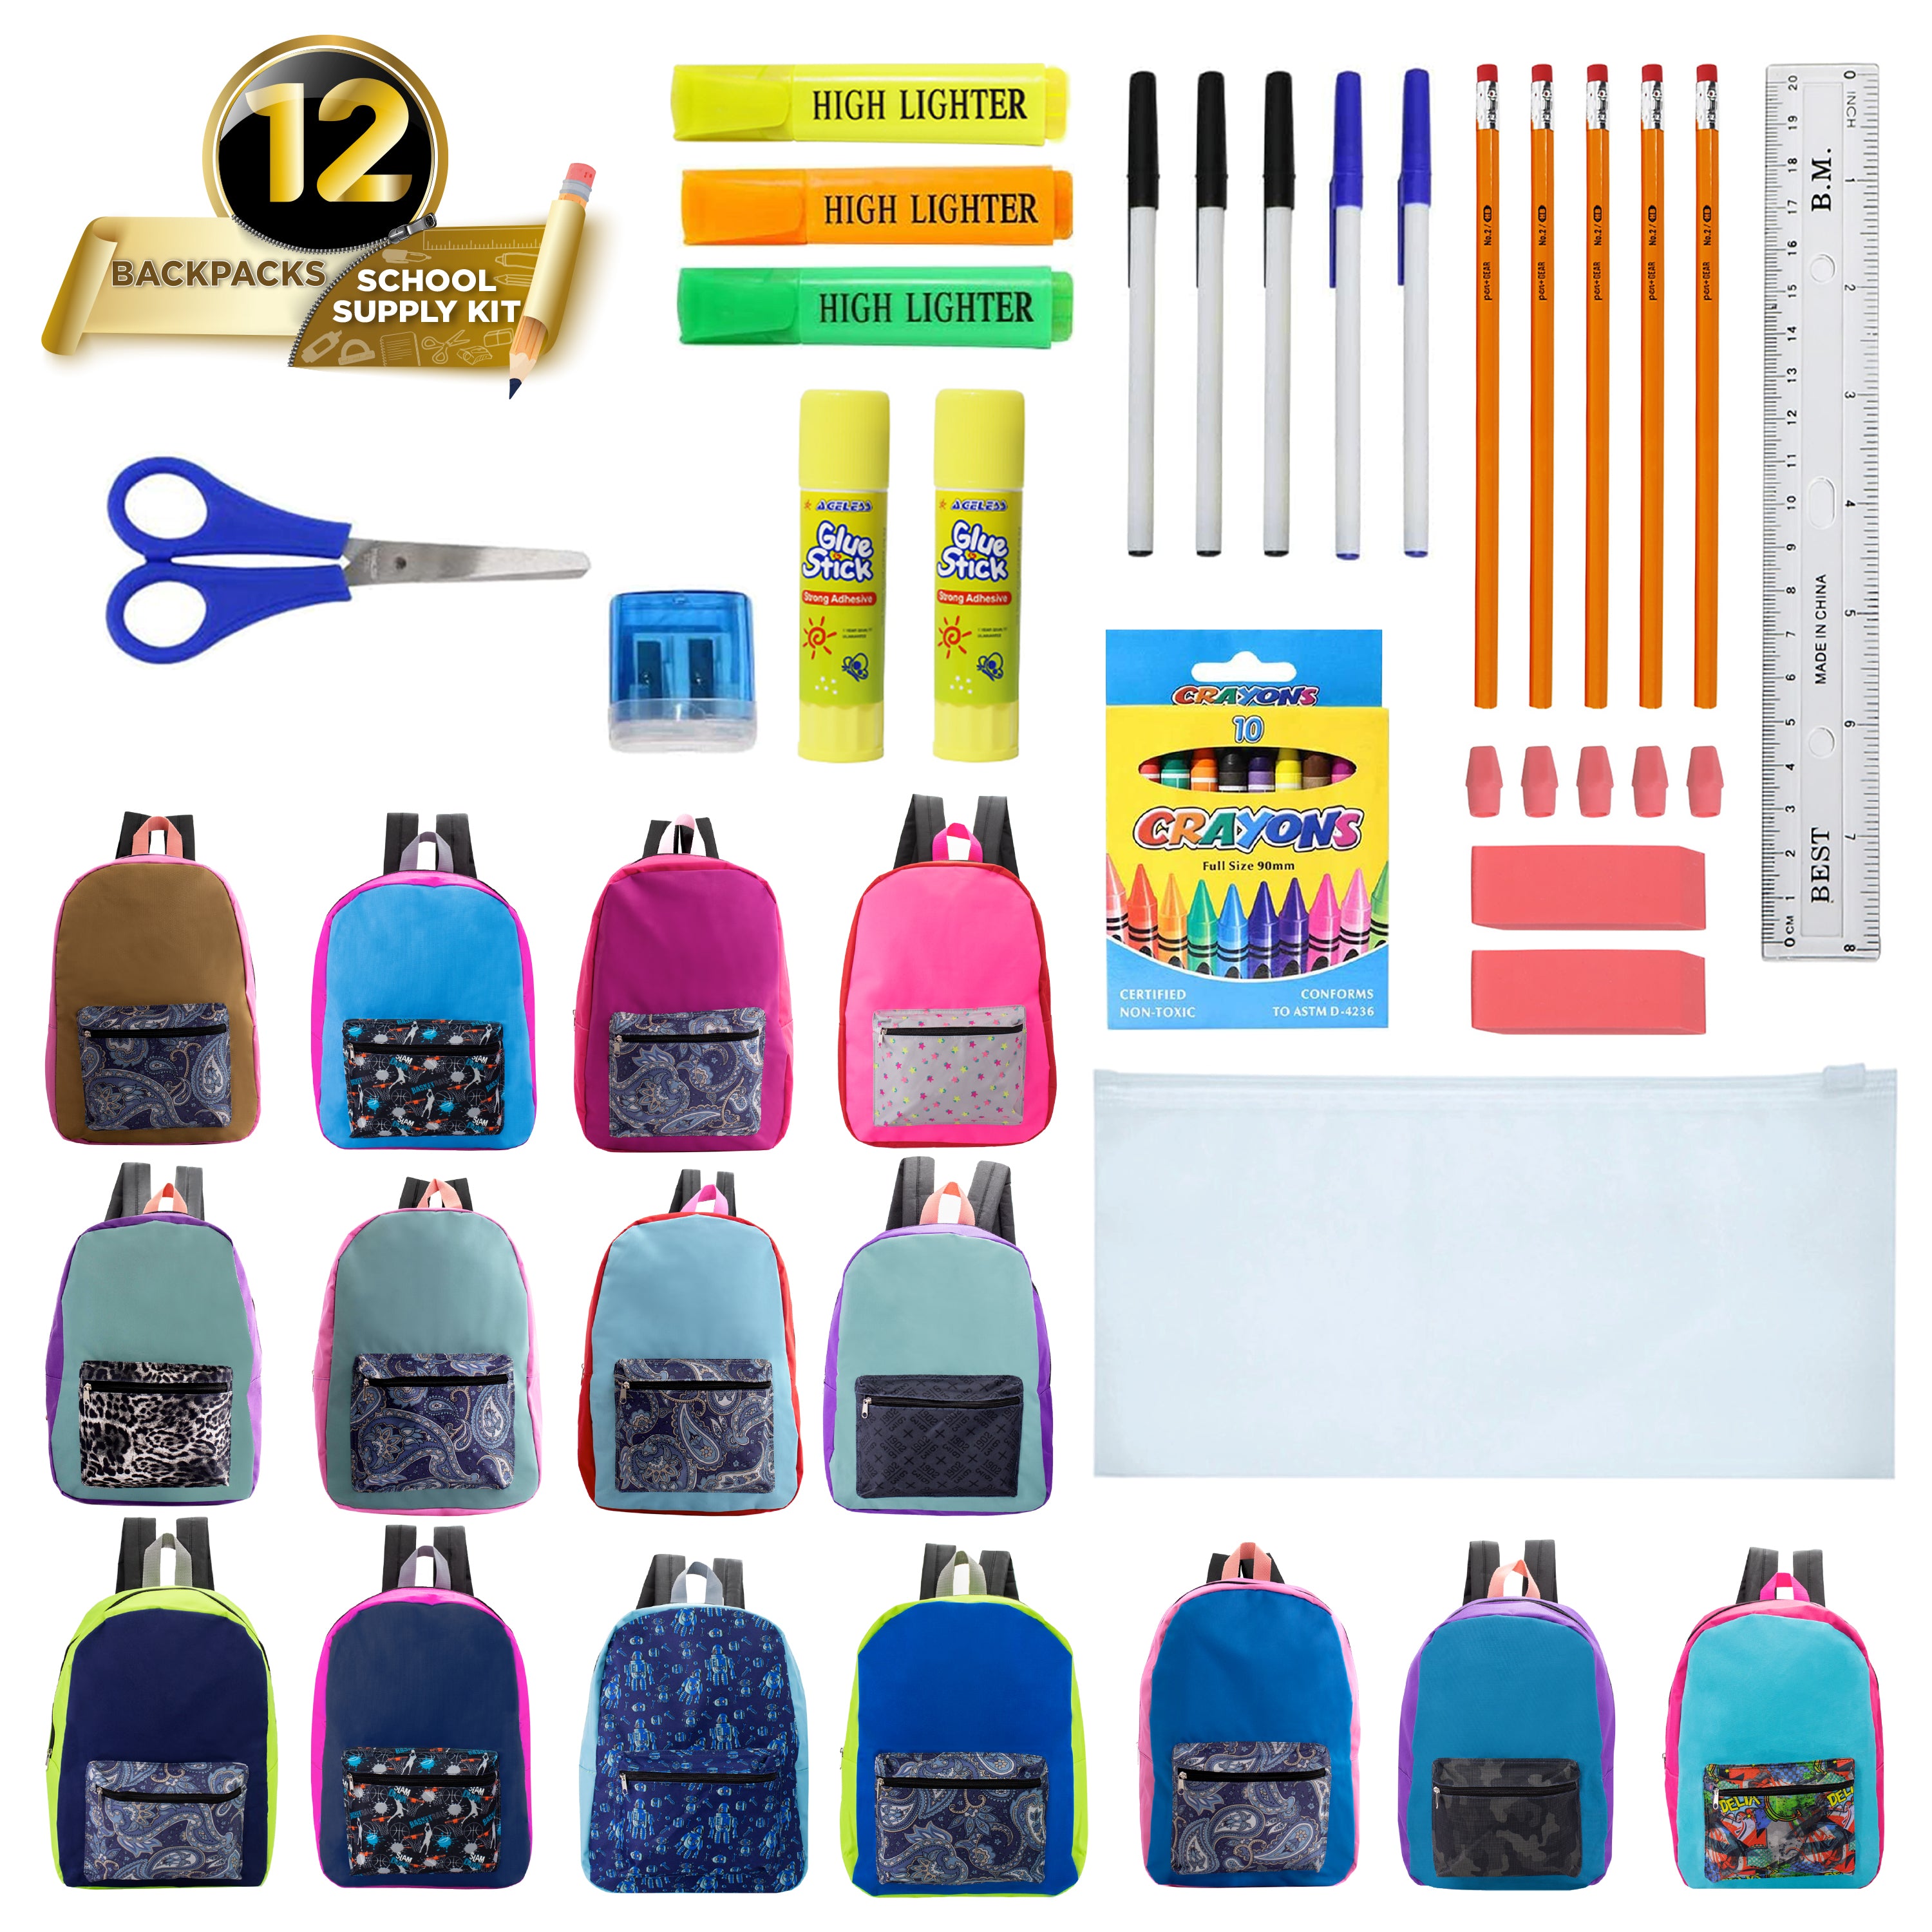 17 inches School Backpacks for Kids In Assorted Prints Bulk School Supplies Kit Case Of 12